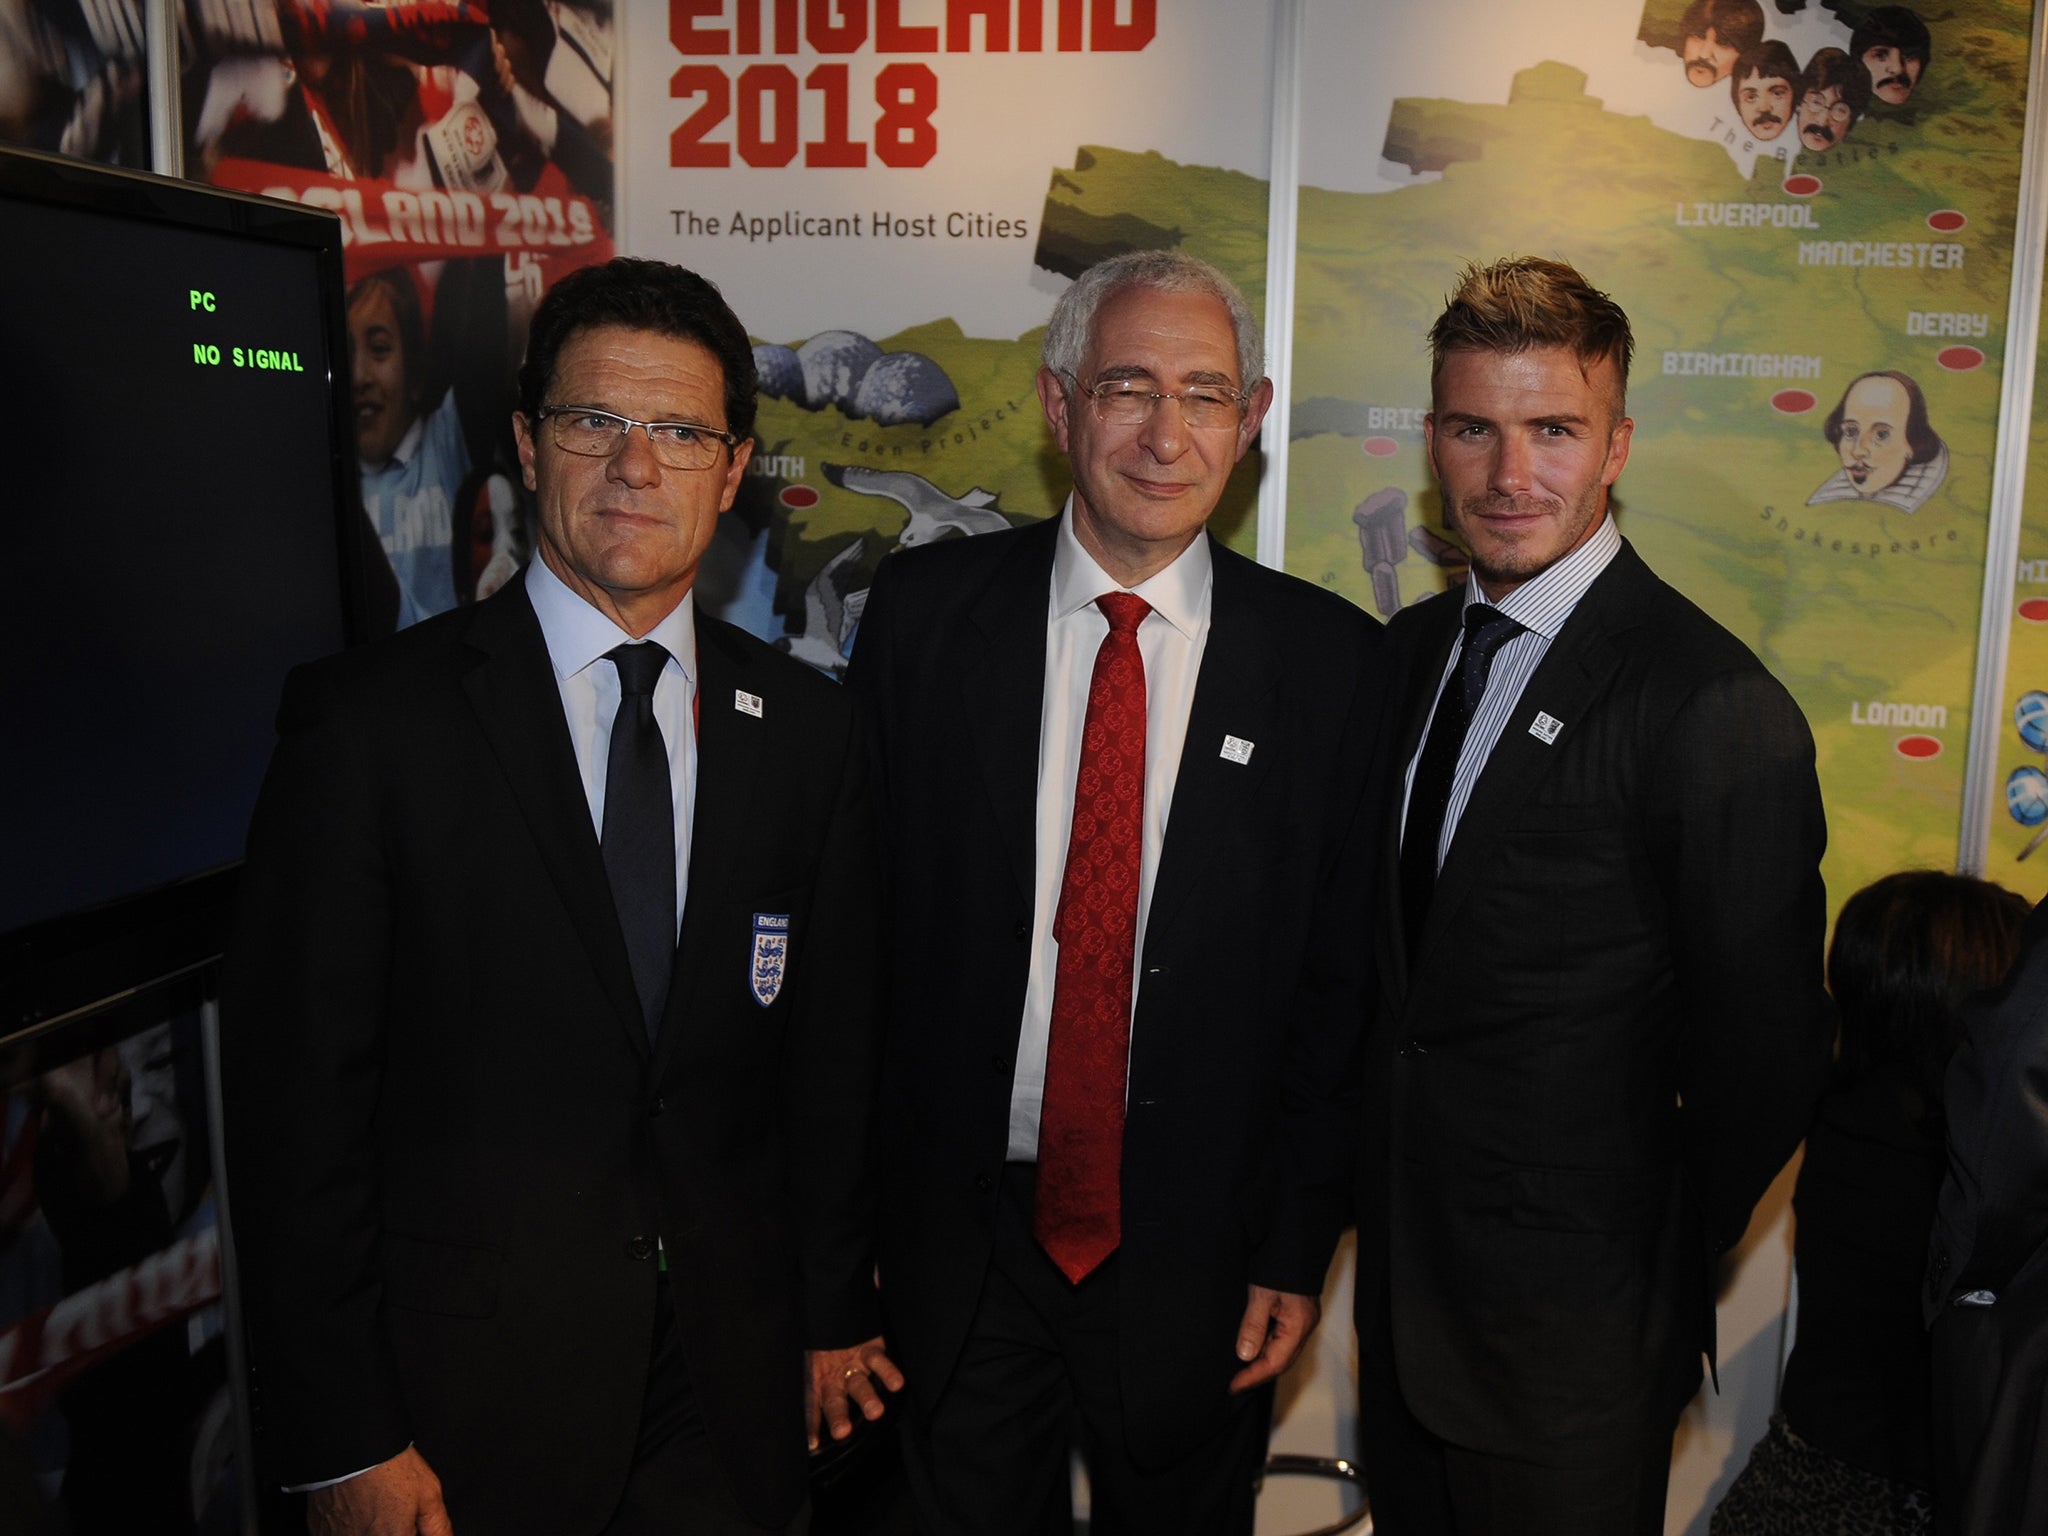 Left to right: England manager Fabio Capello, FA chairman Lord Triesman and David Beckham led the 2018 bid